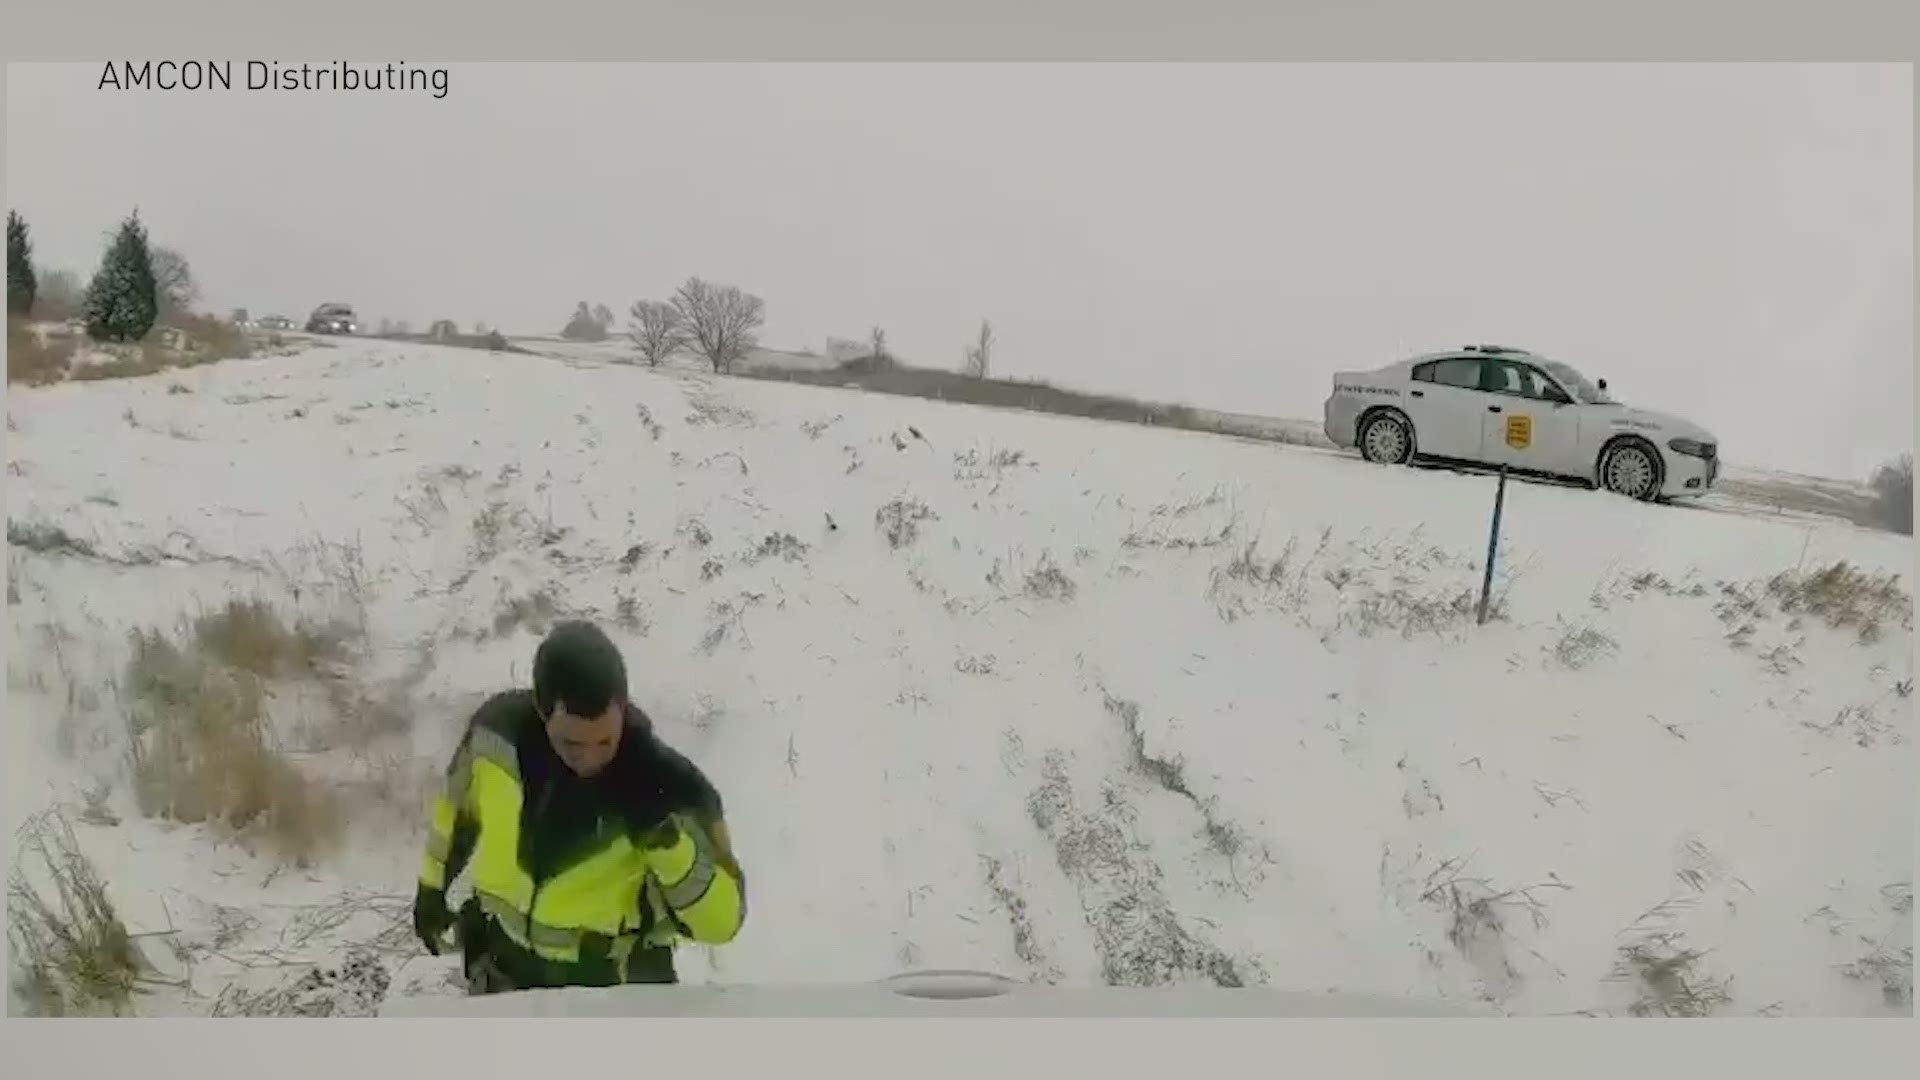 A truck's dash cam captured a close call when a pick-up veered off the road during inclement weather, nearly hitting a state trooper and another driver.